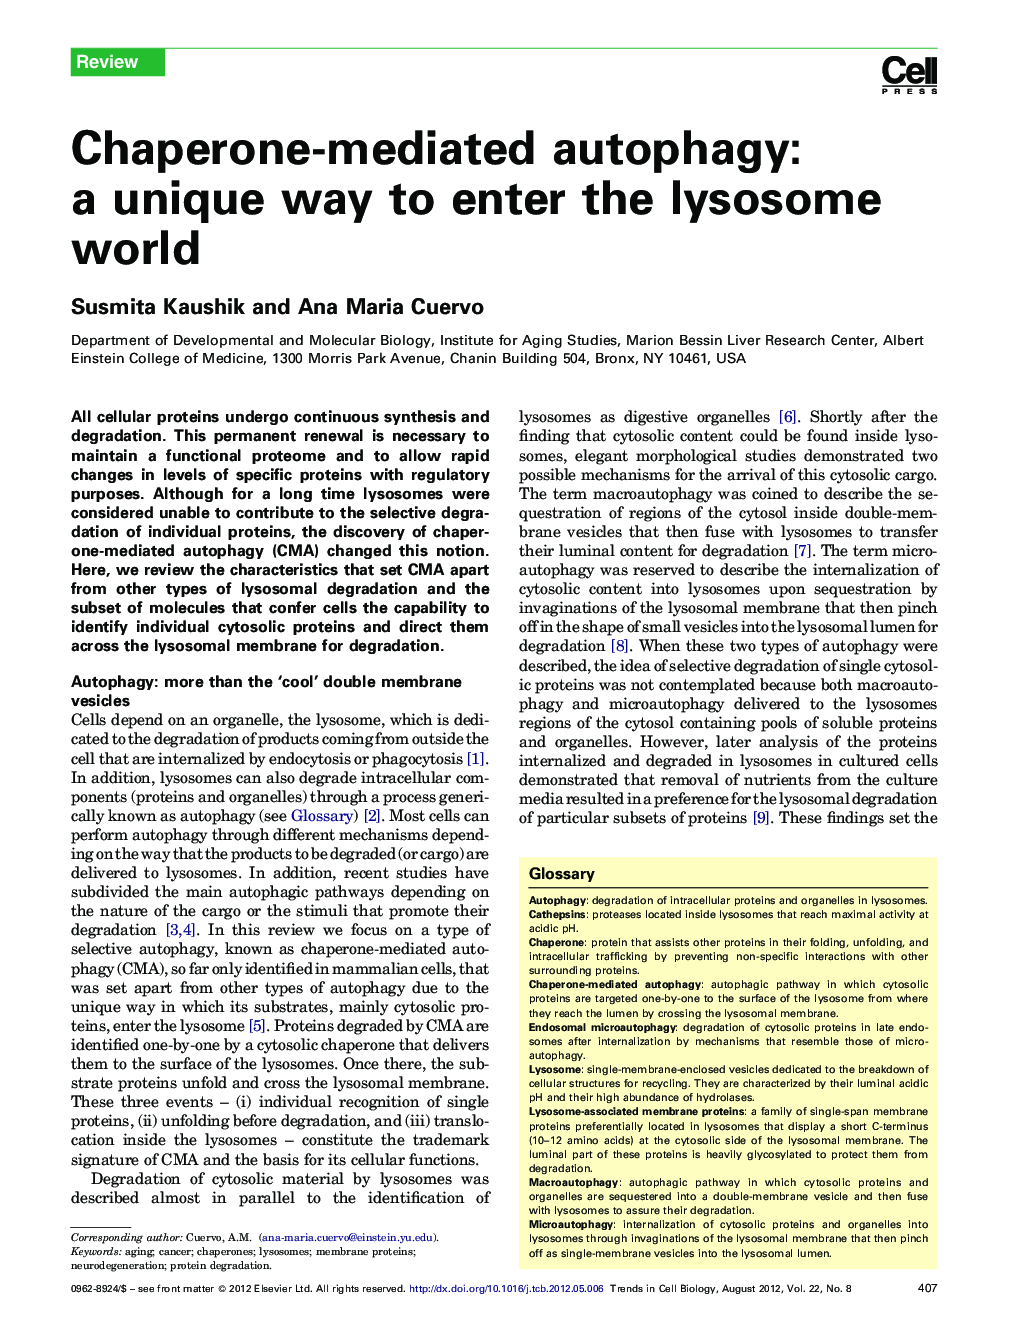 Chaperone-mediated autophagy: a unique way to enter the lysosome world